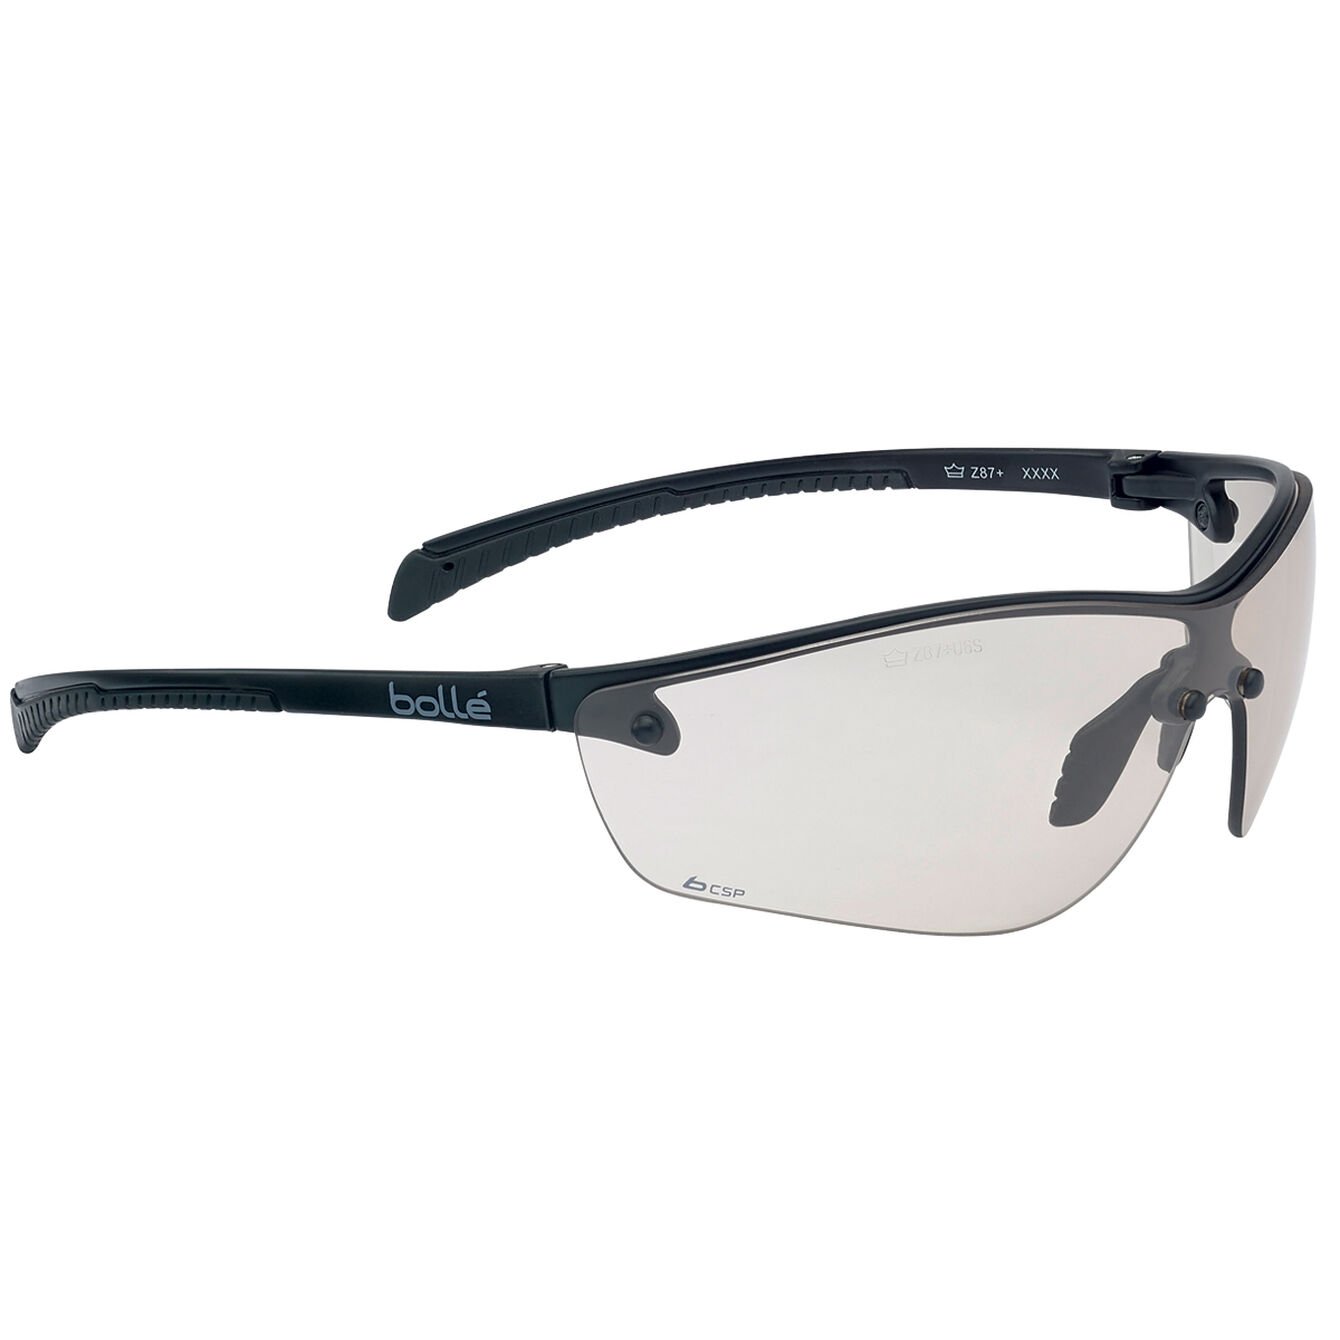 Bolle SILIUM+ BSSI CSP Lens Safety Glasses